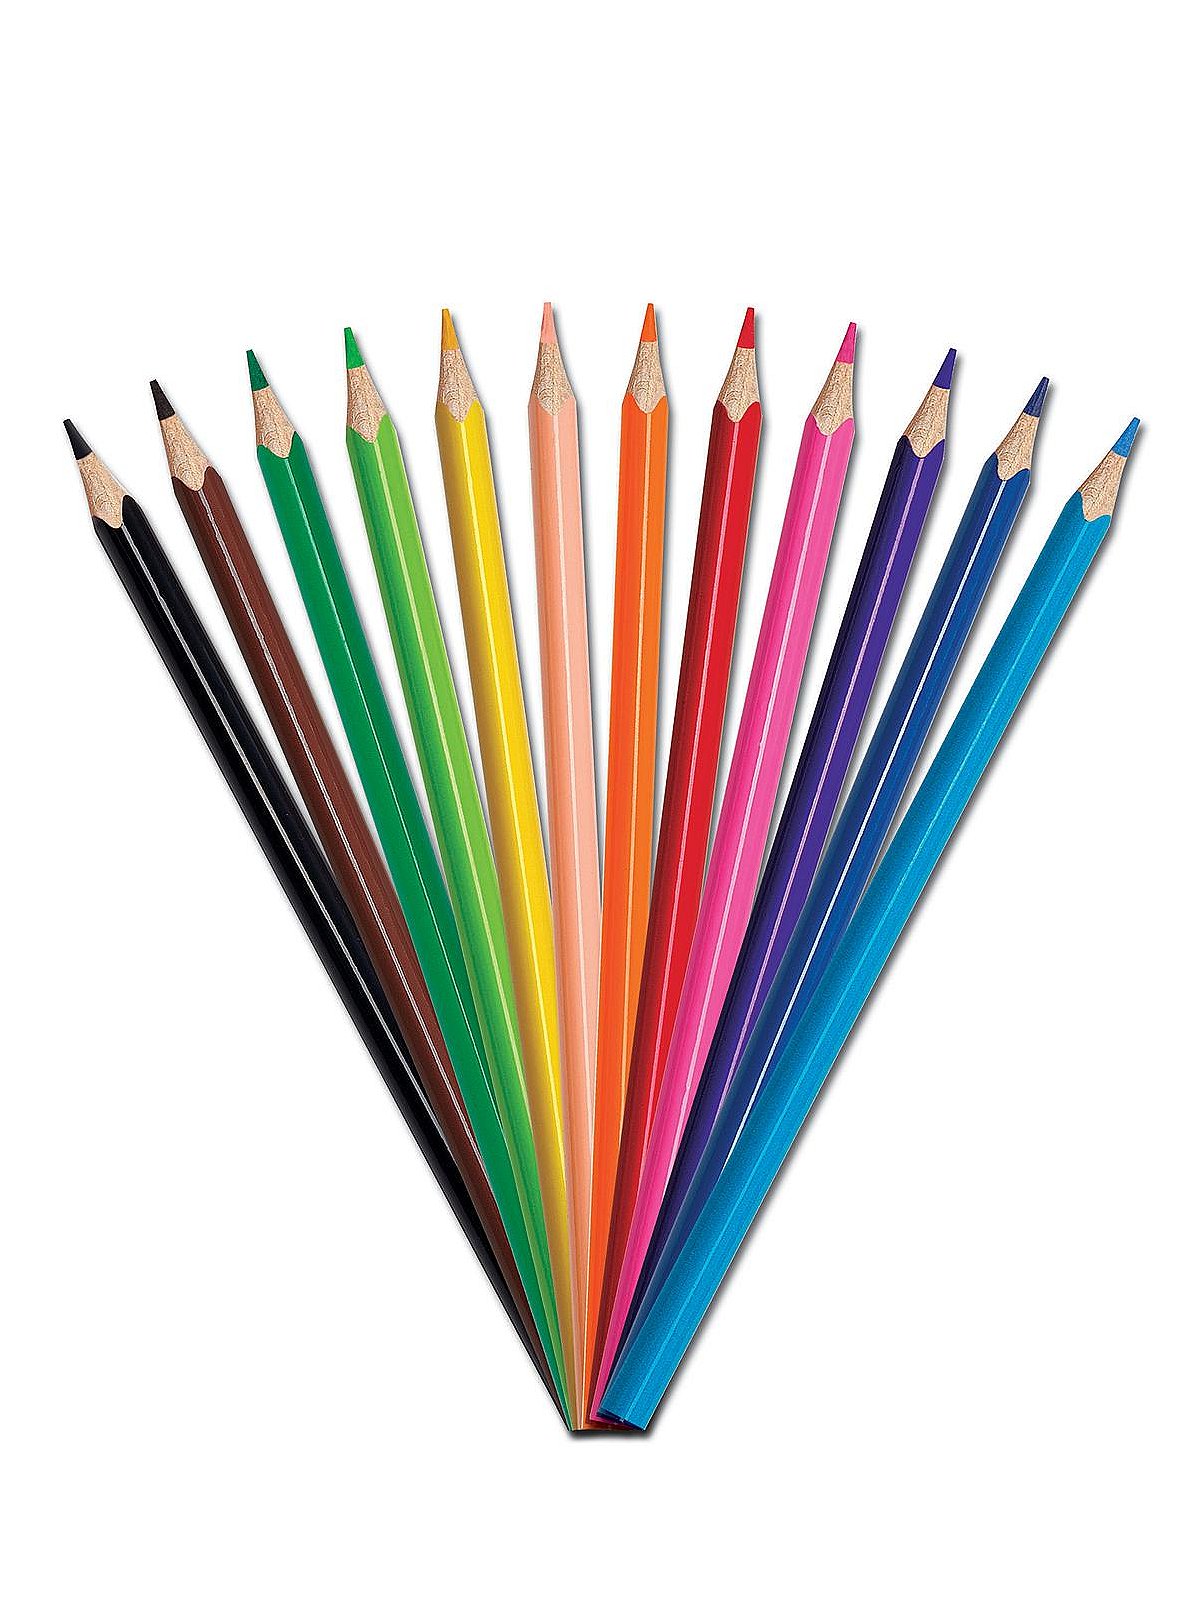 Maped ColorPeps Colored Pencil Sets